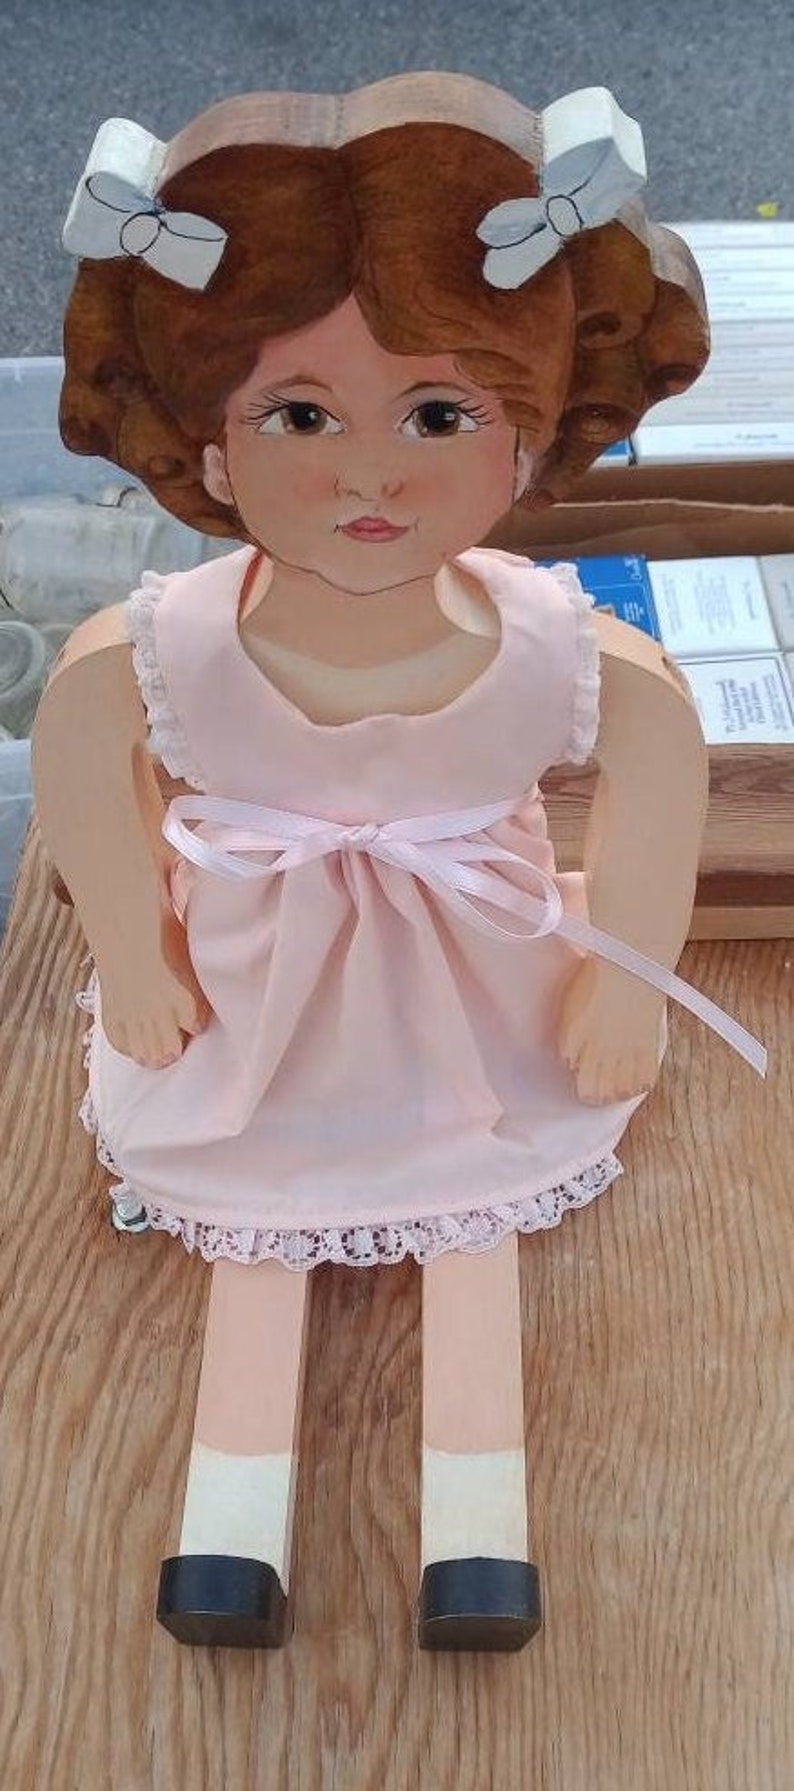 Handmade/Painted Wooden Doll image 1